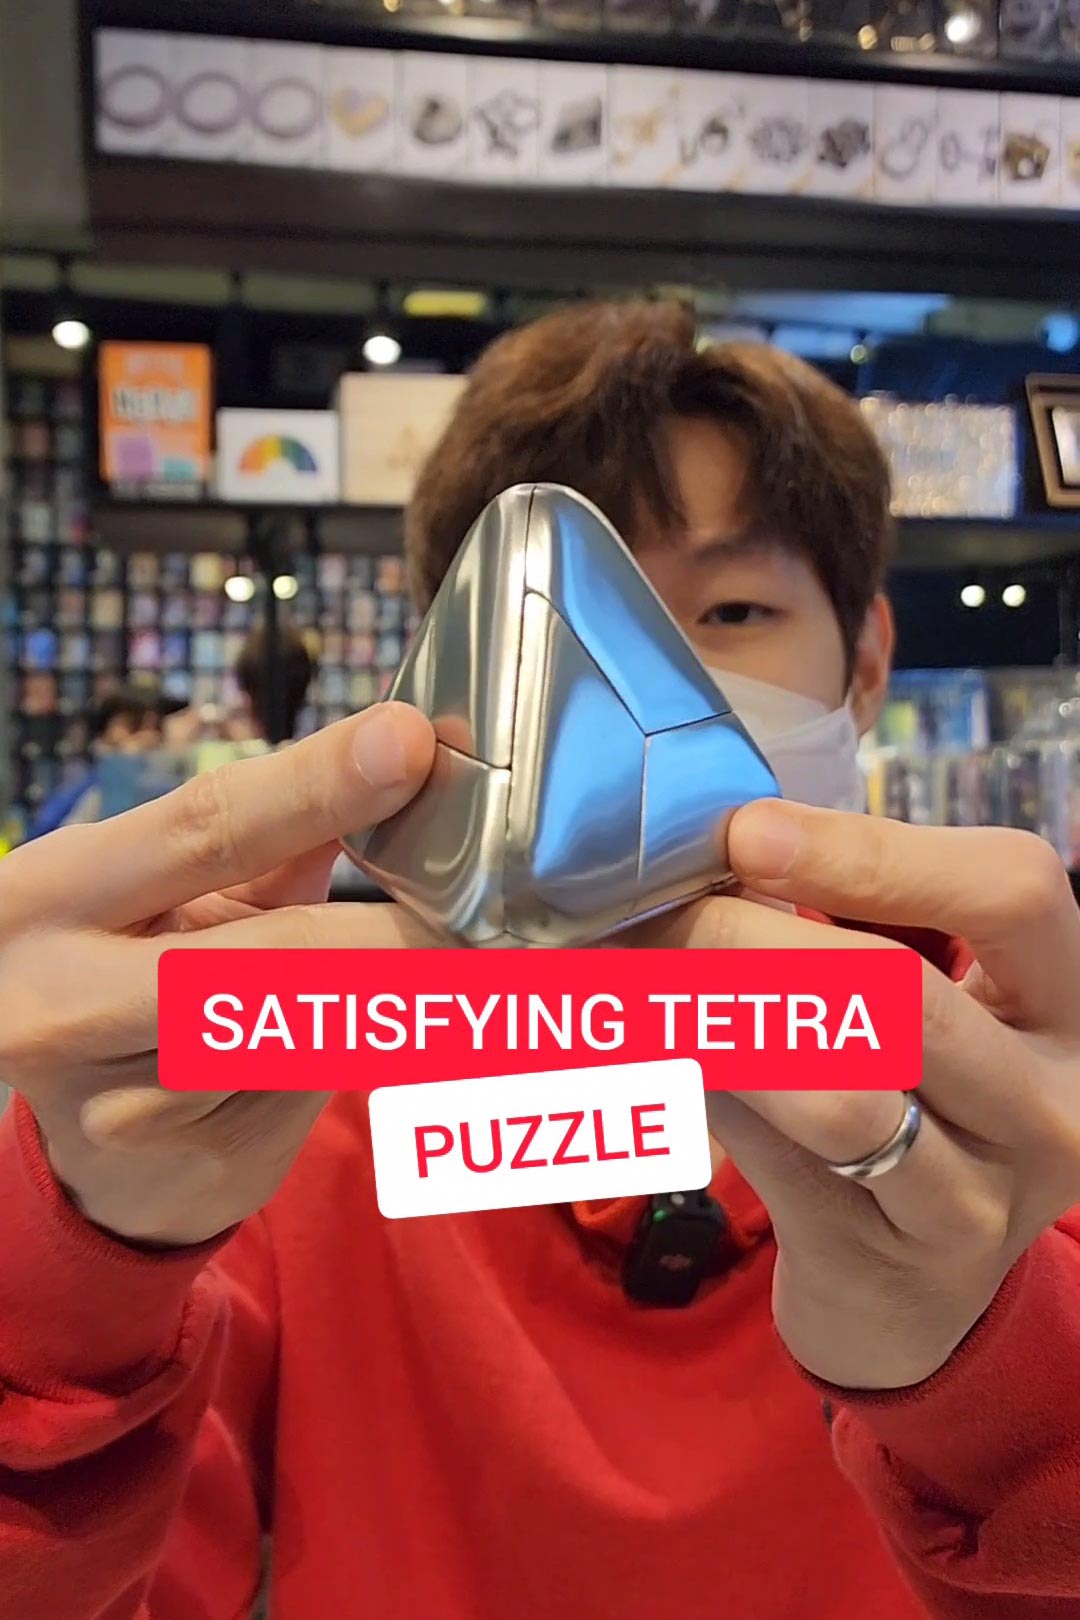 The Satisfying Tetra Puzzle!